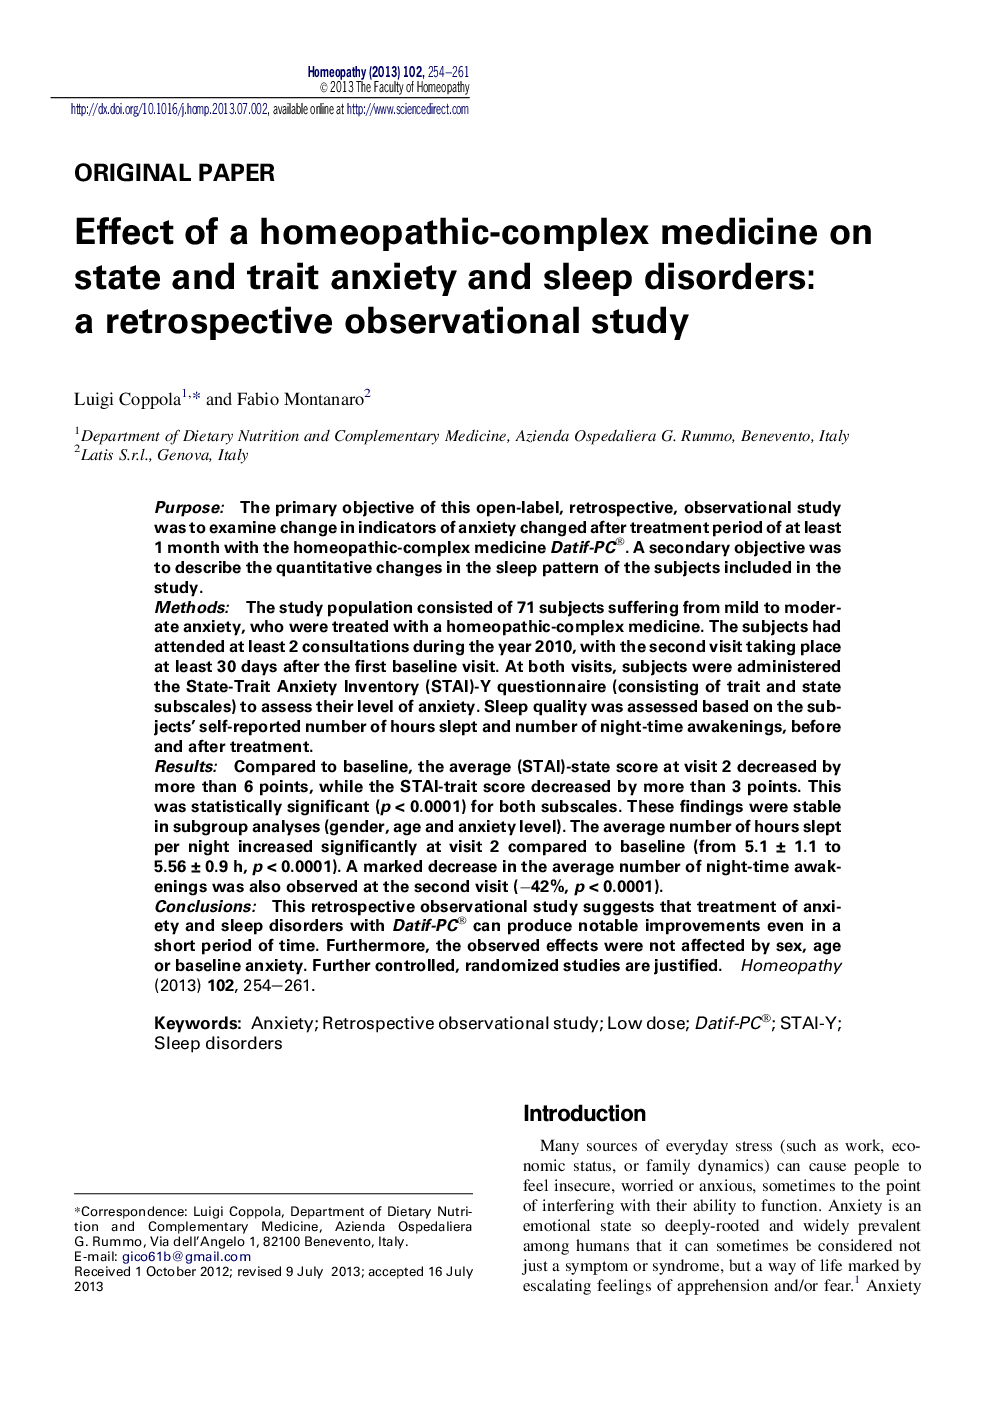 Effect of a homeopathic-complex medicine on state and trait anxiety and sleep disorders: a retrospective observational study